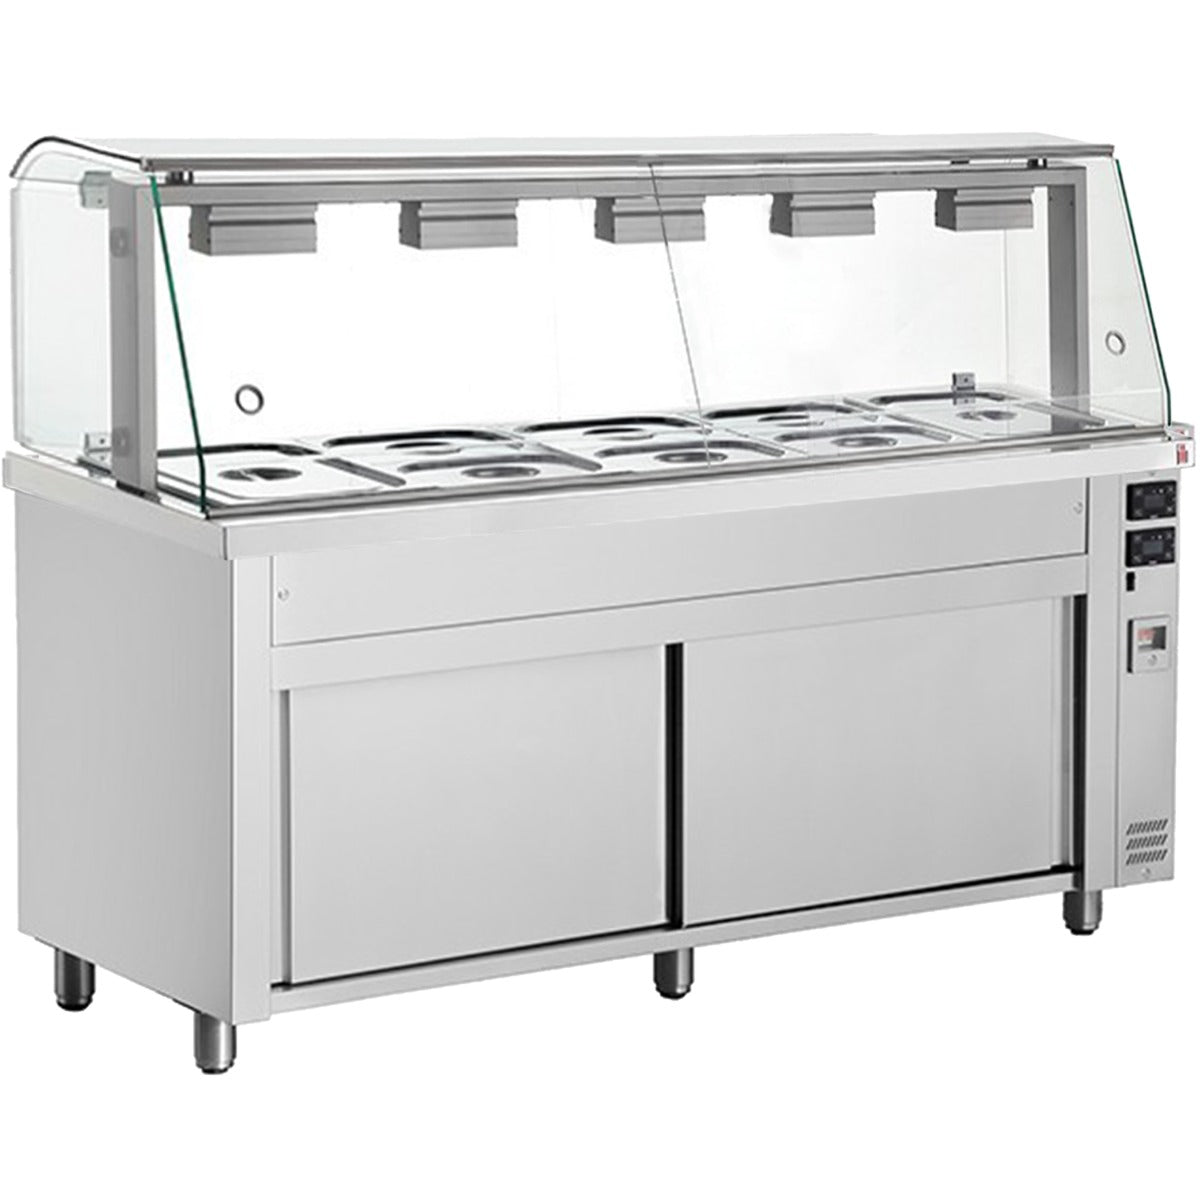 Inomak Bain Marie with glass structure 5x GN1/1